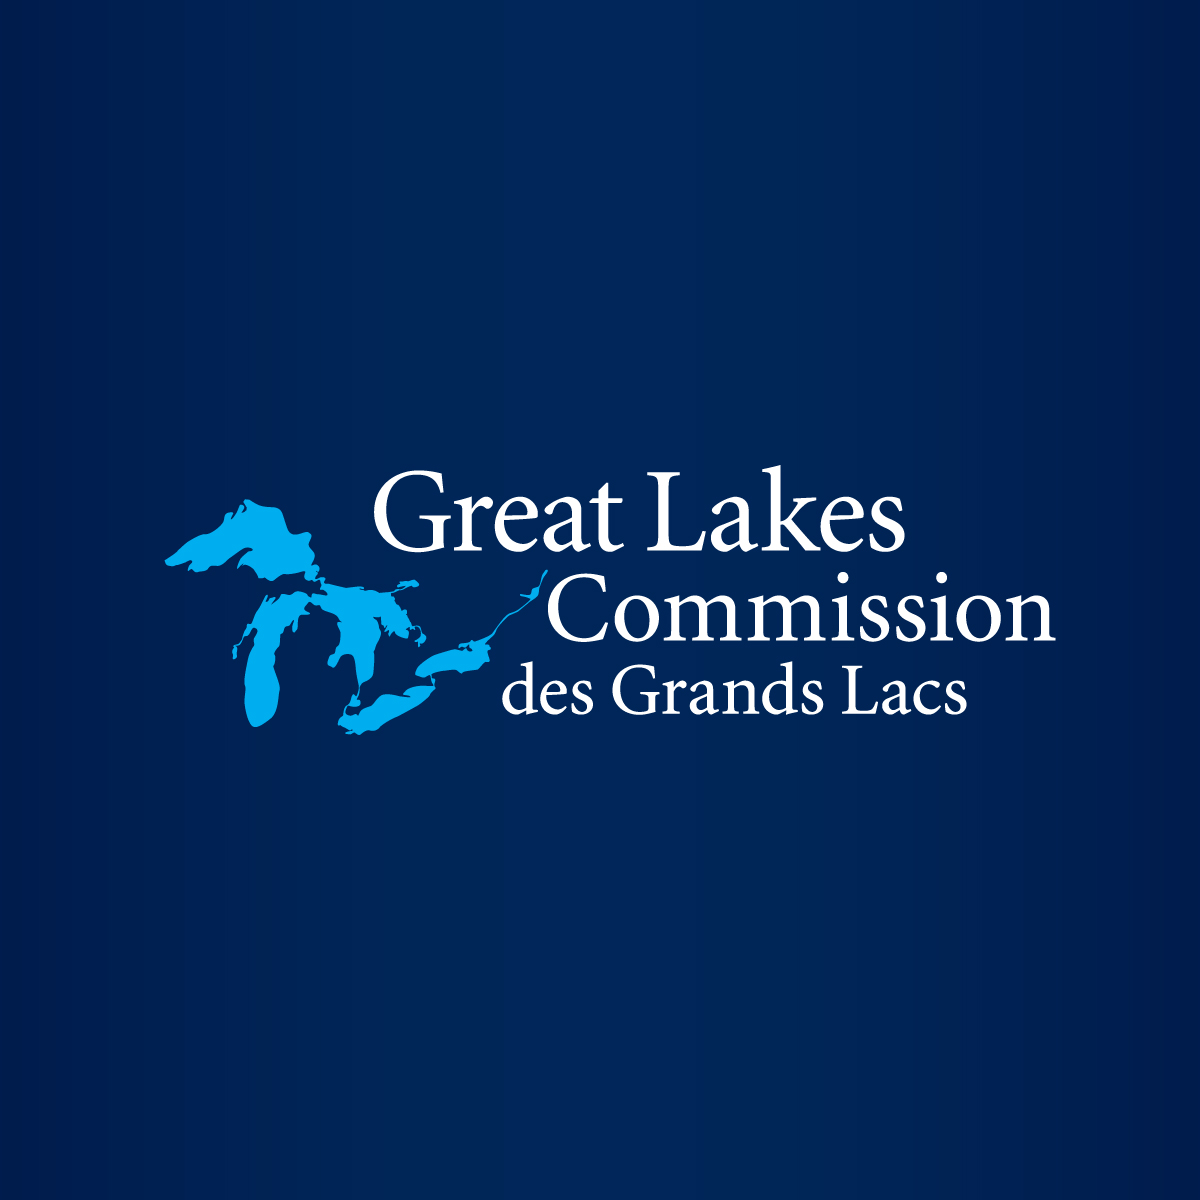 great lakes ice coverage declines as the climate warms